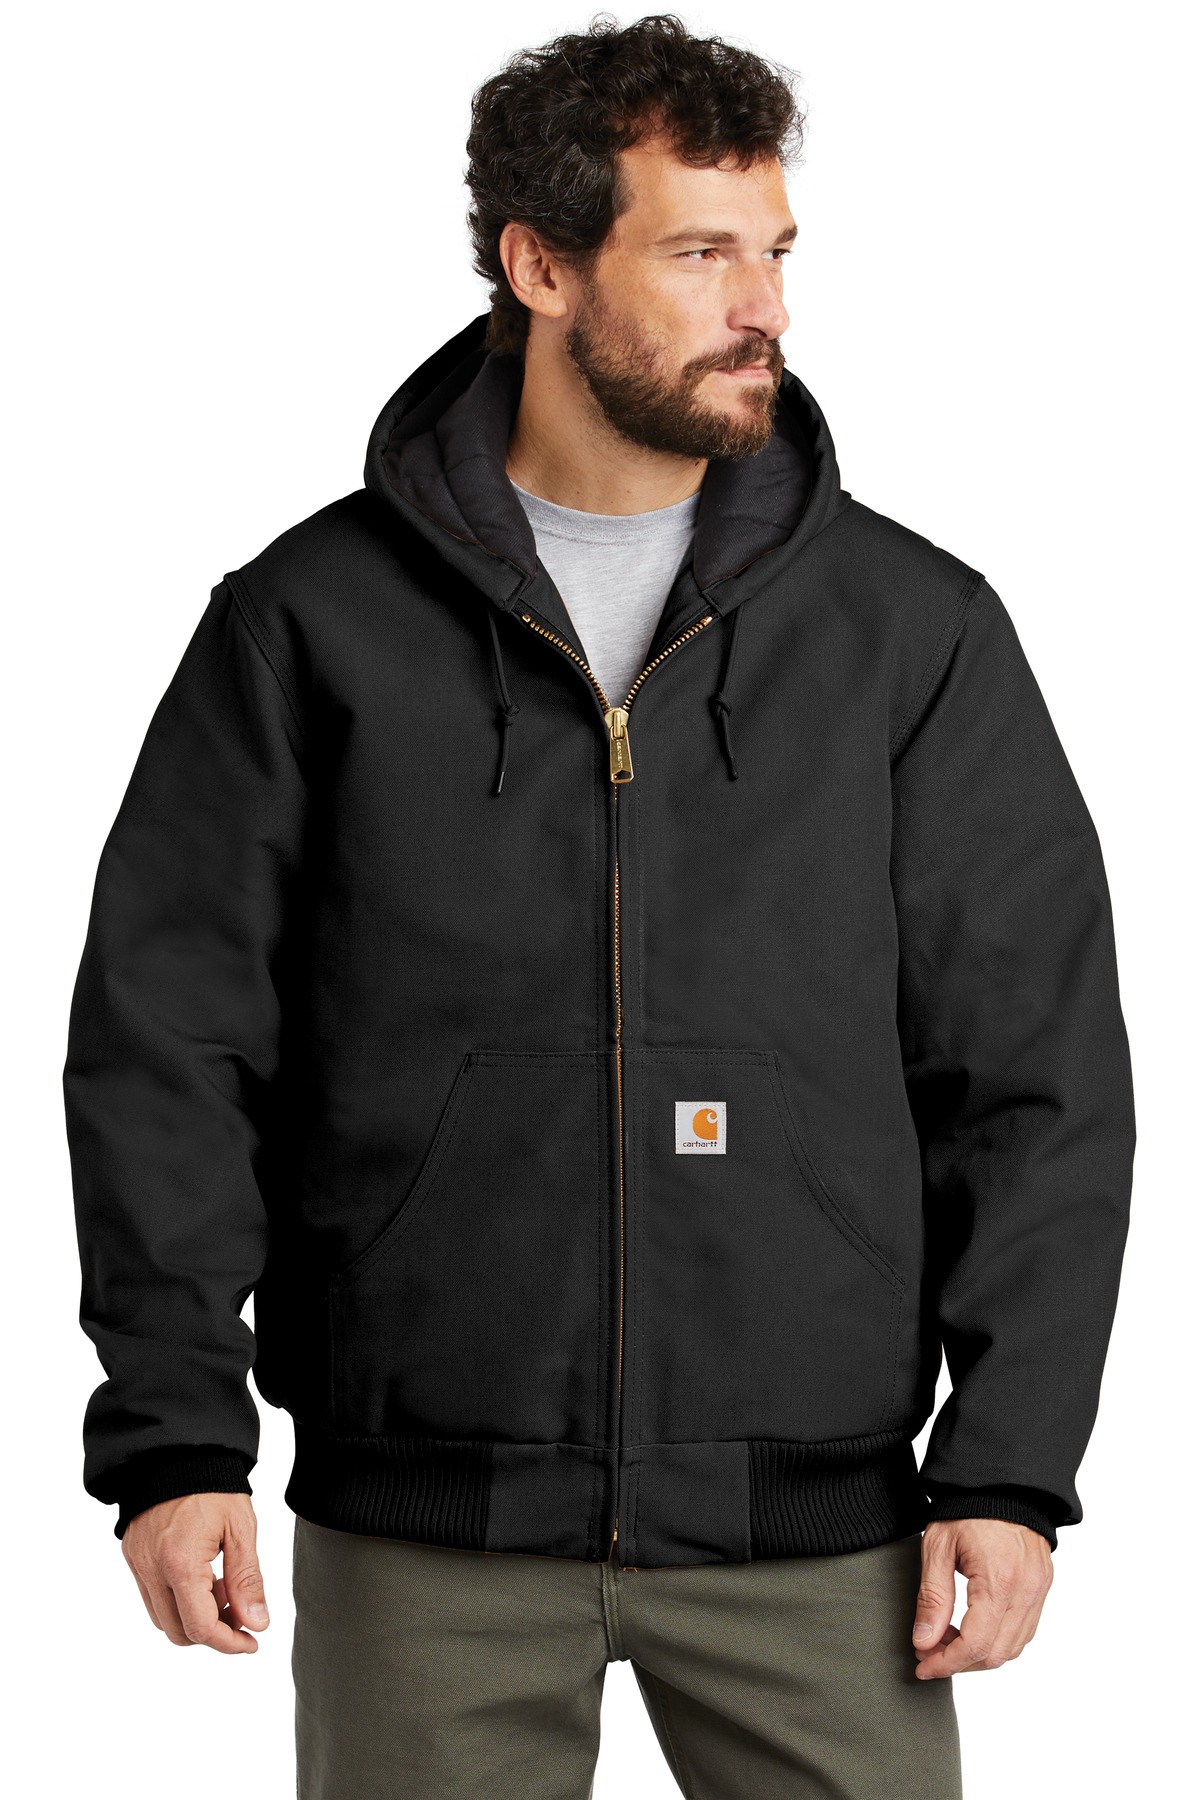 Carhartt Hospitality Outerwear &Workwear ® Tall Quilted-Flannel-Lined Duck Active Jac.-Carhartt